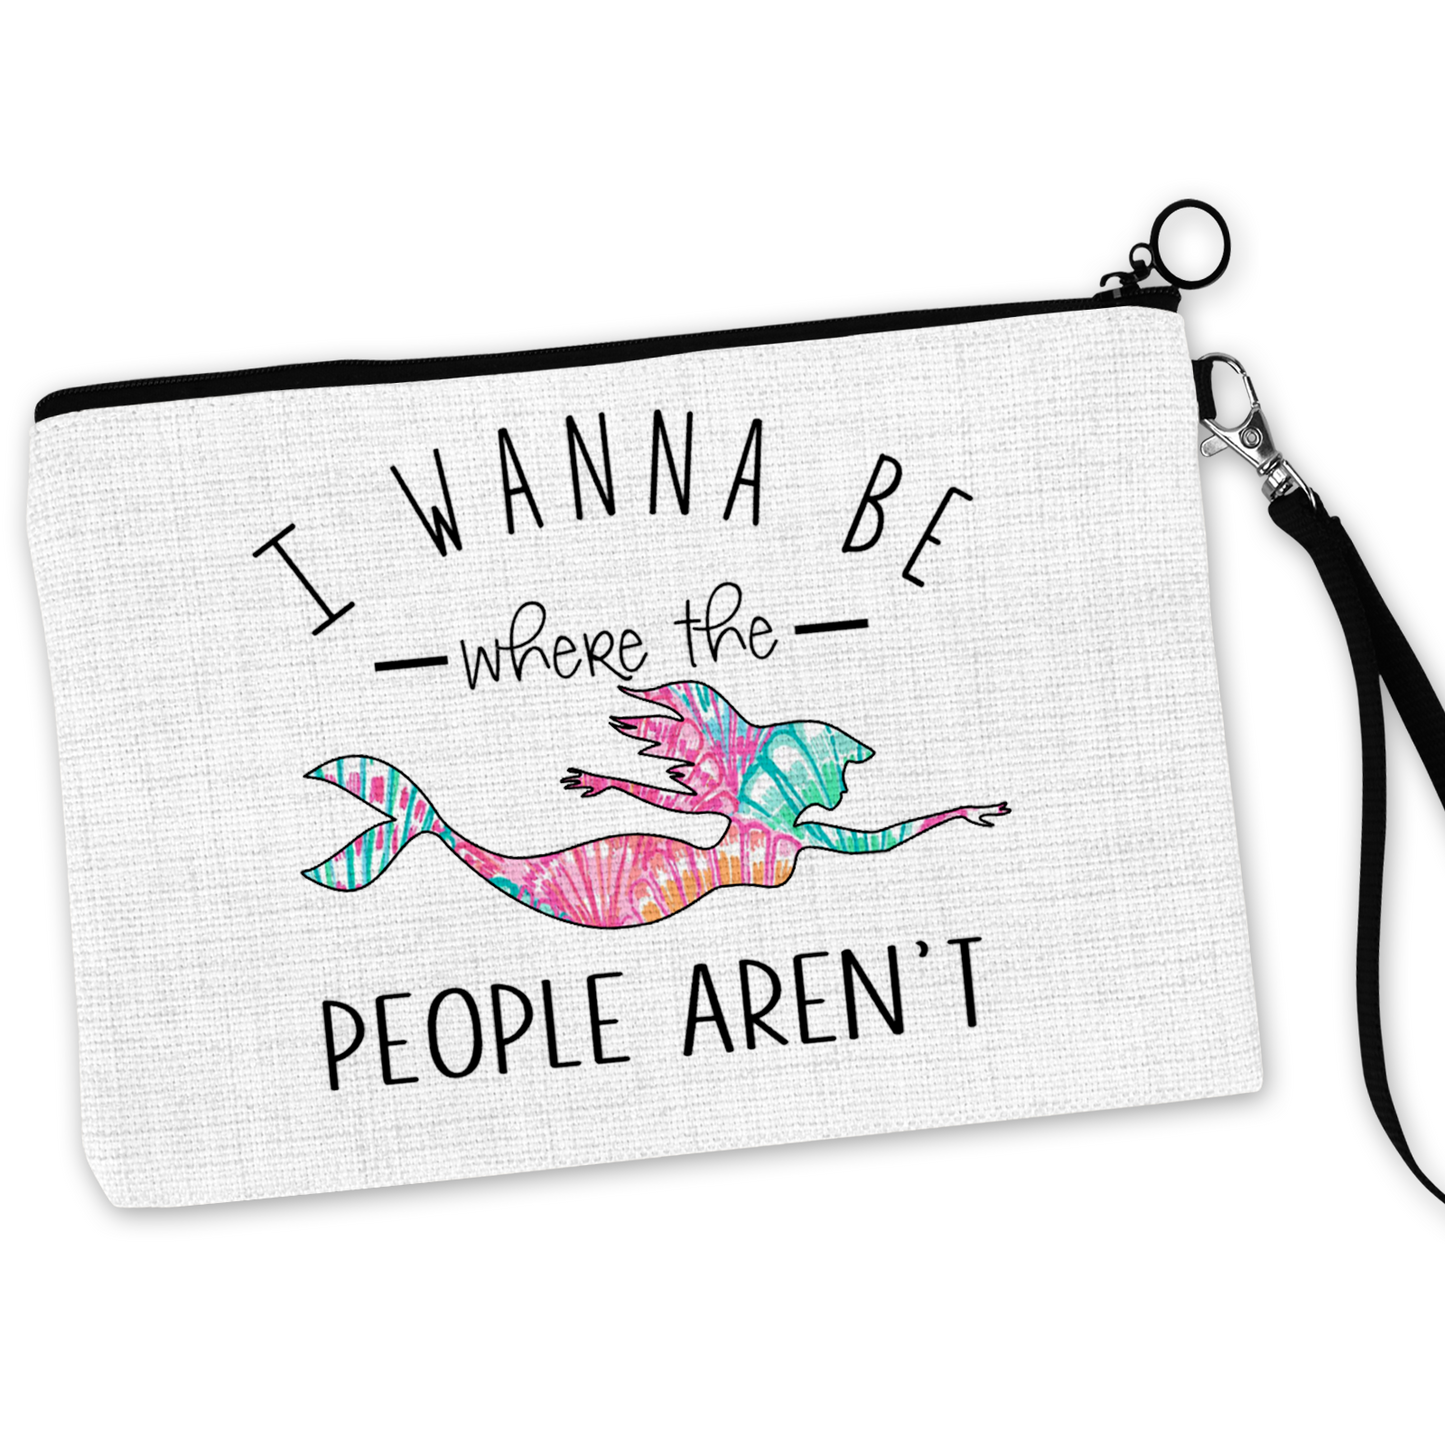 I Wanna Be Where The People Aren't Cosmetic Bag